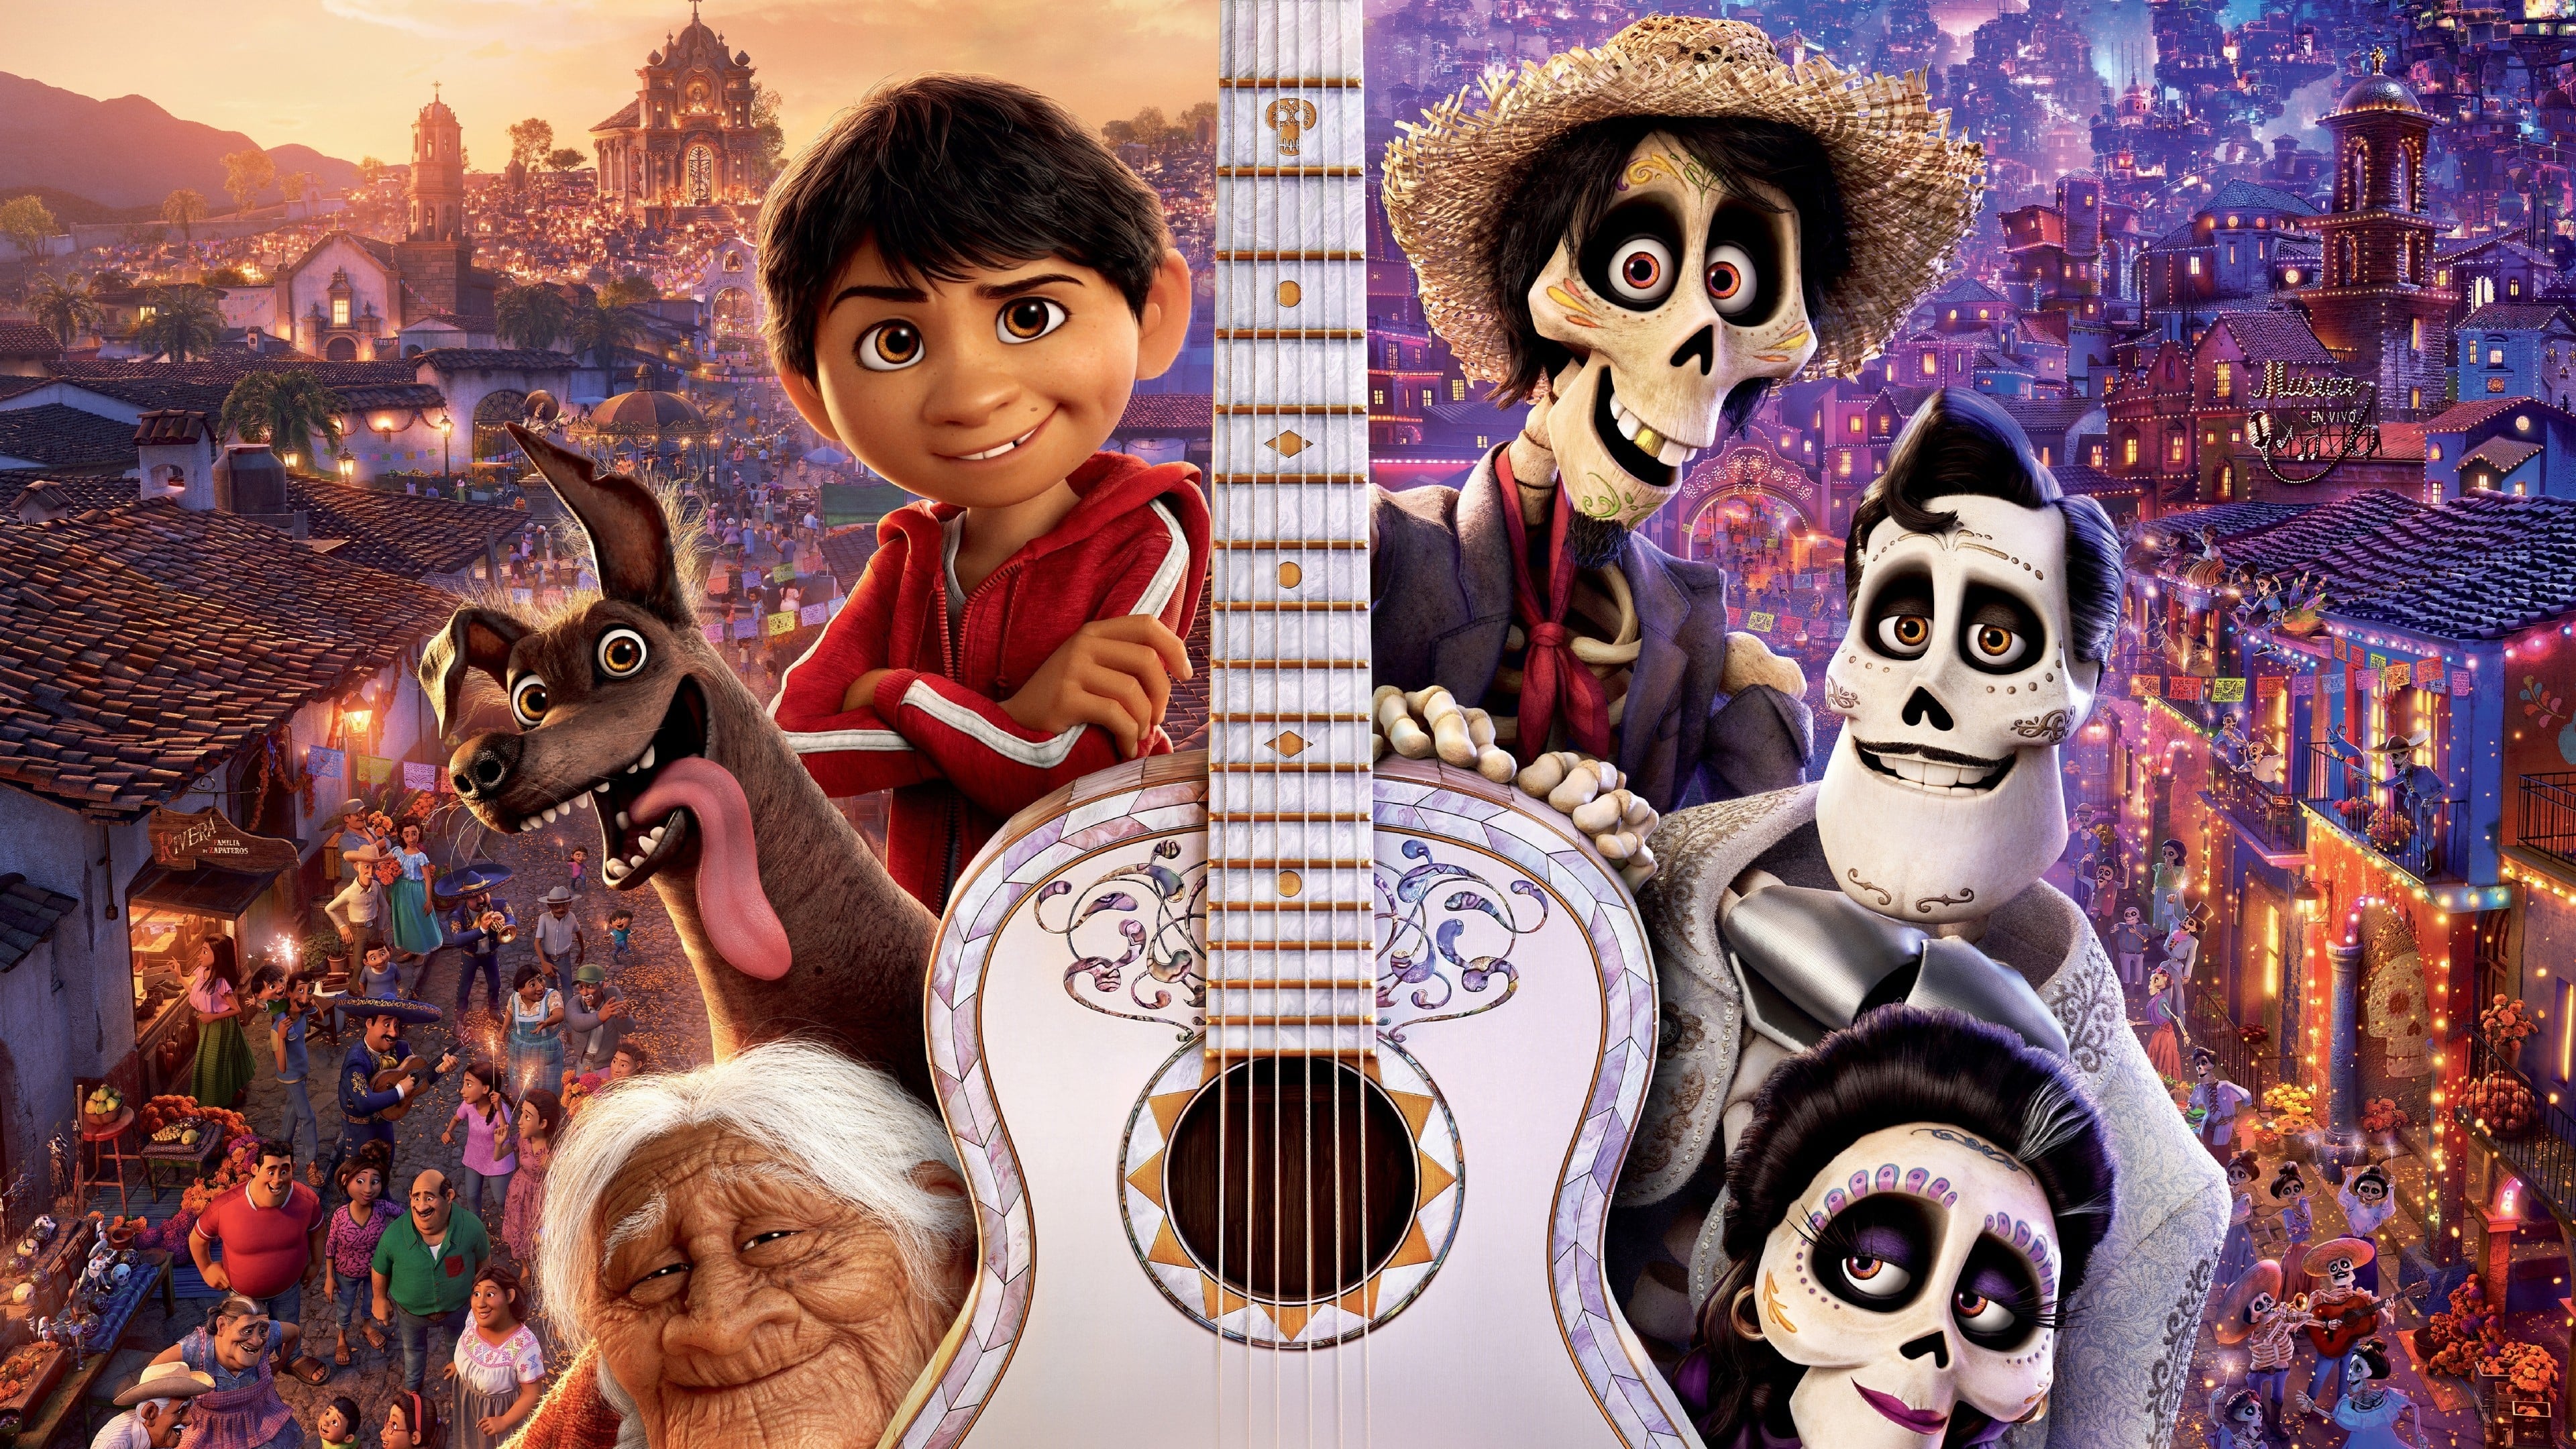 Undead Affectionate Music Touching Pixar Animation Children's Growth